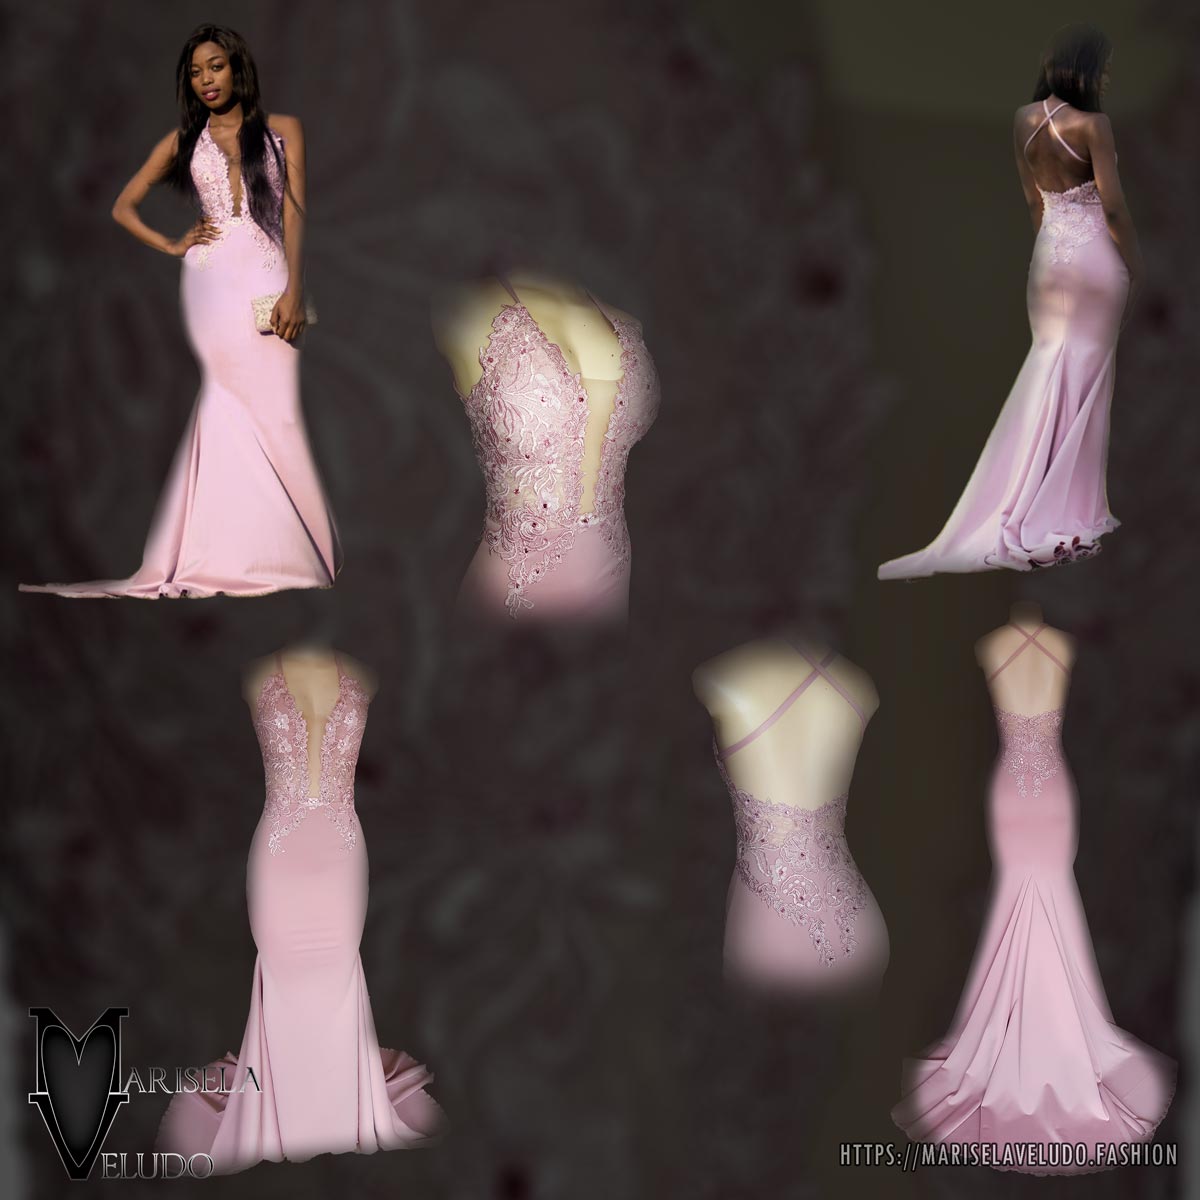 Pink sexy soft mermaid prom dress 8 look ravishing on your prom night with this pink sexy soft mermaid prom dress. A fitted lace bodice with a plunging neckline, low back and a train to add some glamour to your important event.